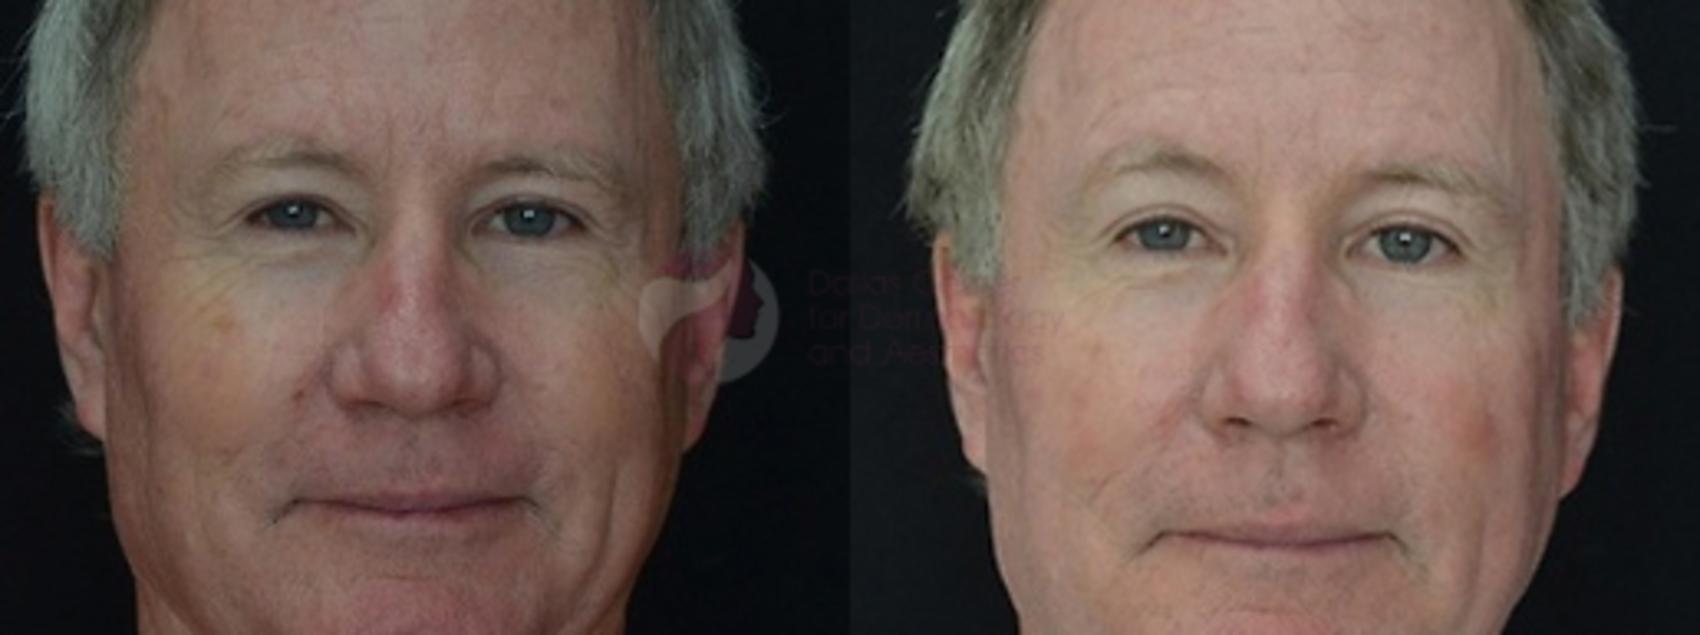 Before & After Chemical Peels Case 64 Front View in Dallas, Plano, and Frisco, TX